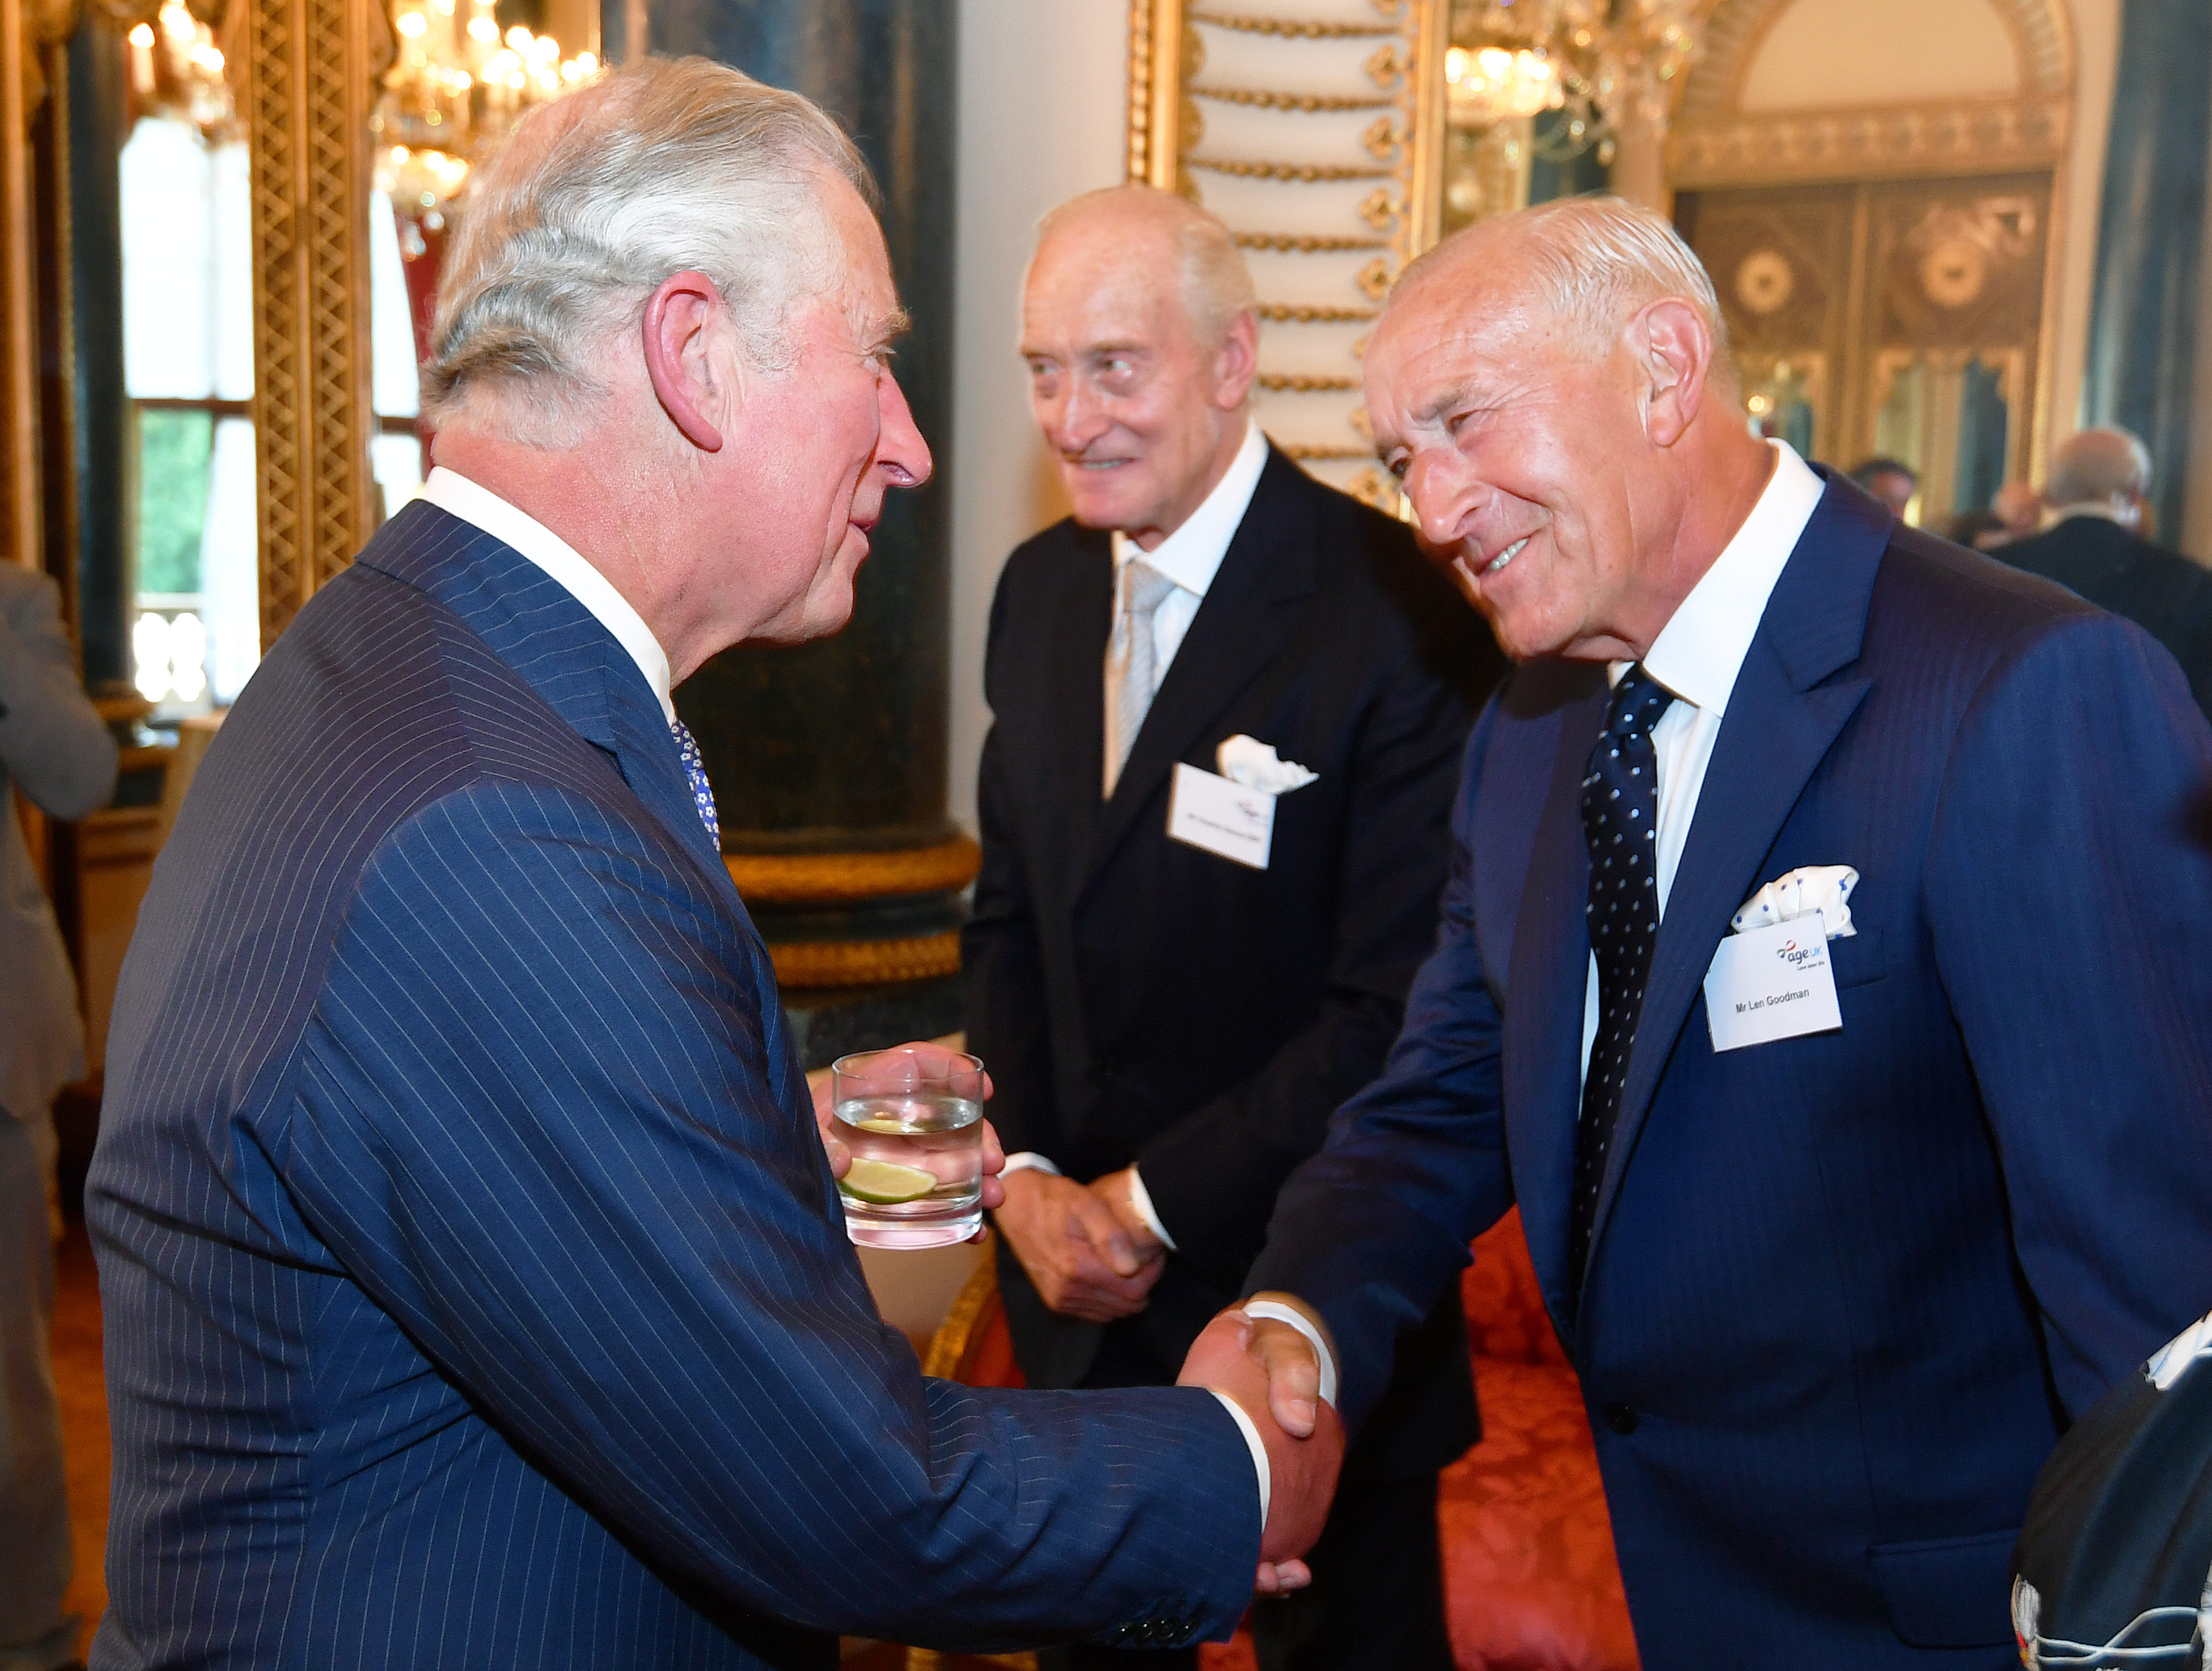 Prince Charles and Len Goodman at the reception for Age UK at Buckingham Palace in London 2018 | Getty Images